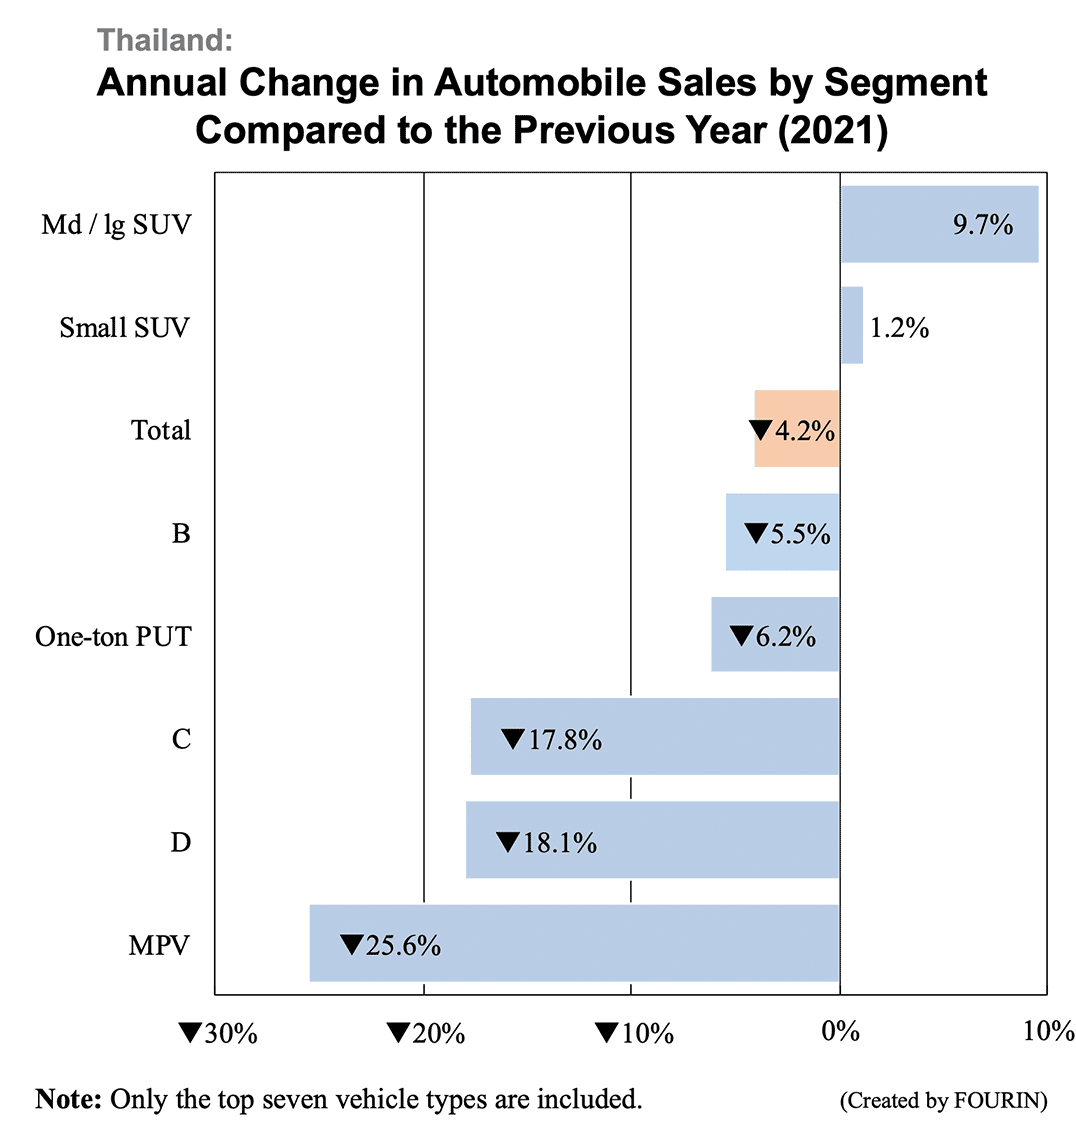 Bar graph: Thailand: Annual Change in Automobile Sales by Segment Compared to the Previous Year (2021)